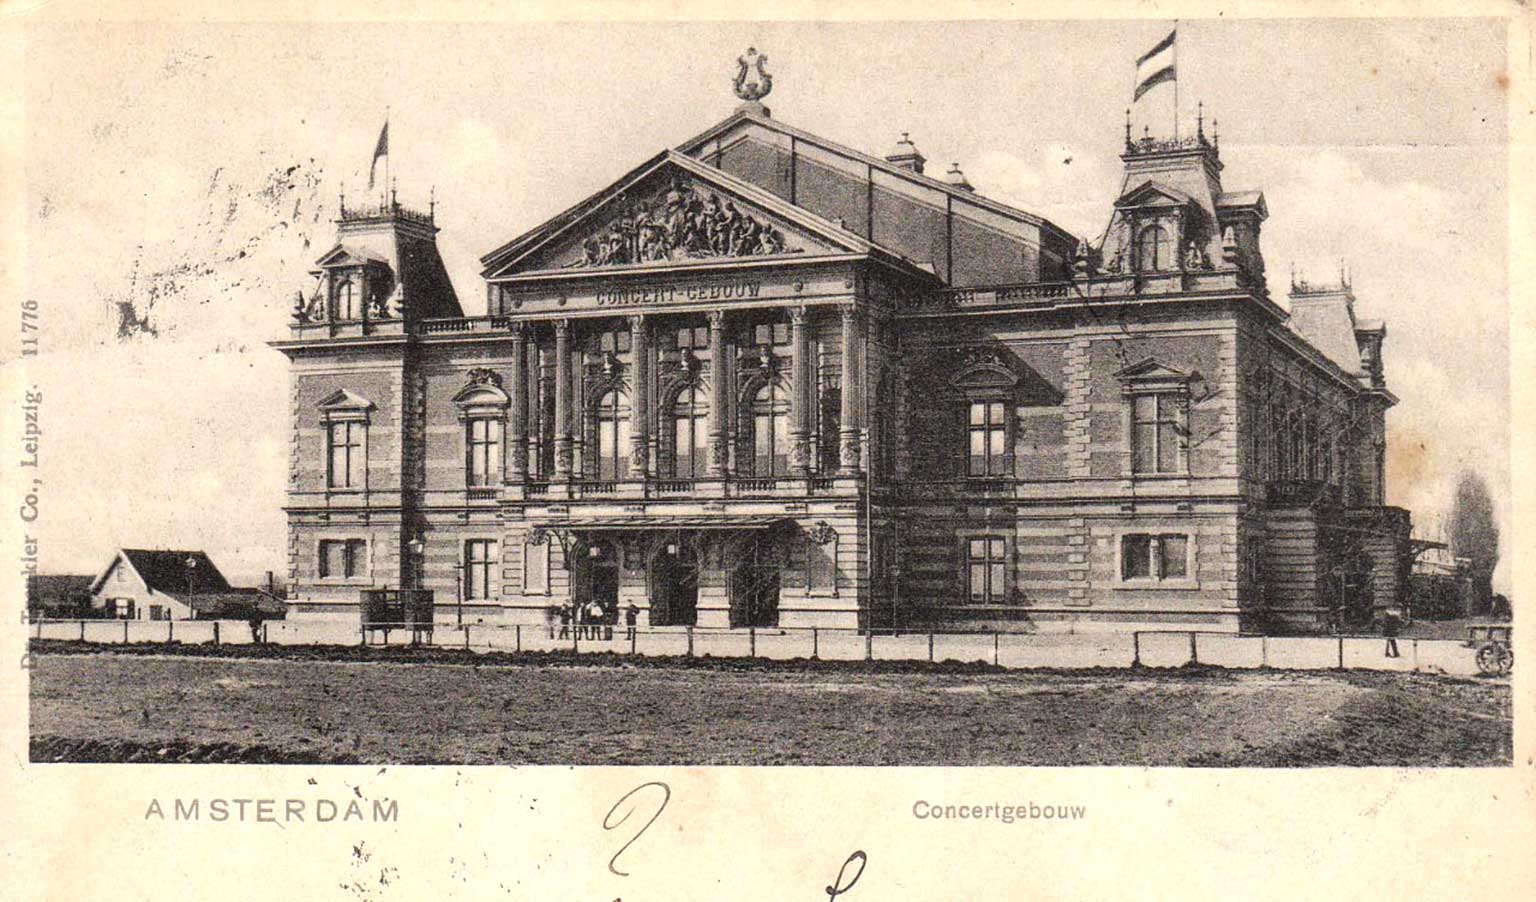 Concertgebouw in the middle of nowhere, around 1900